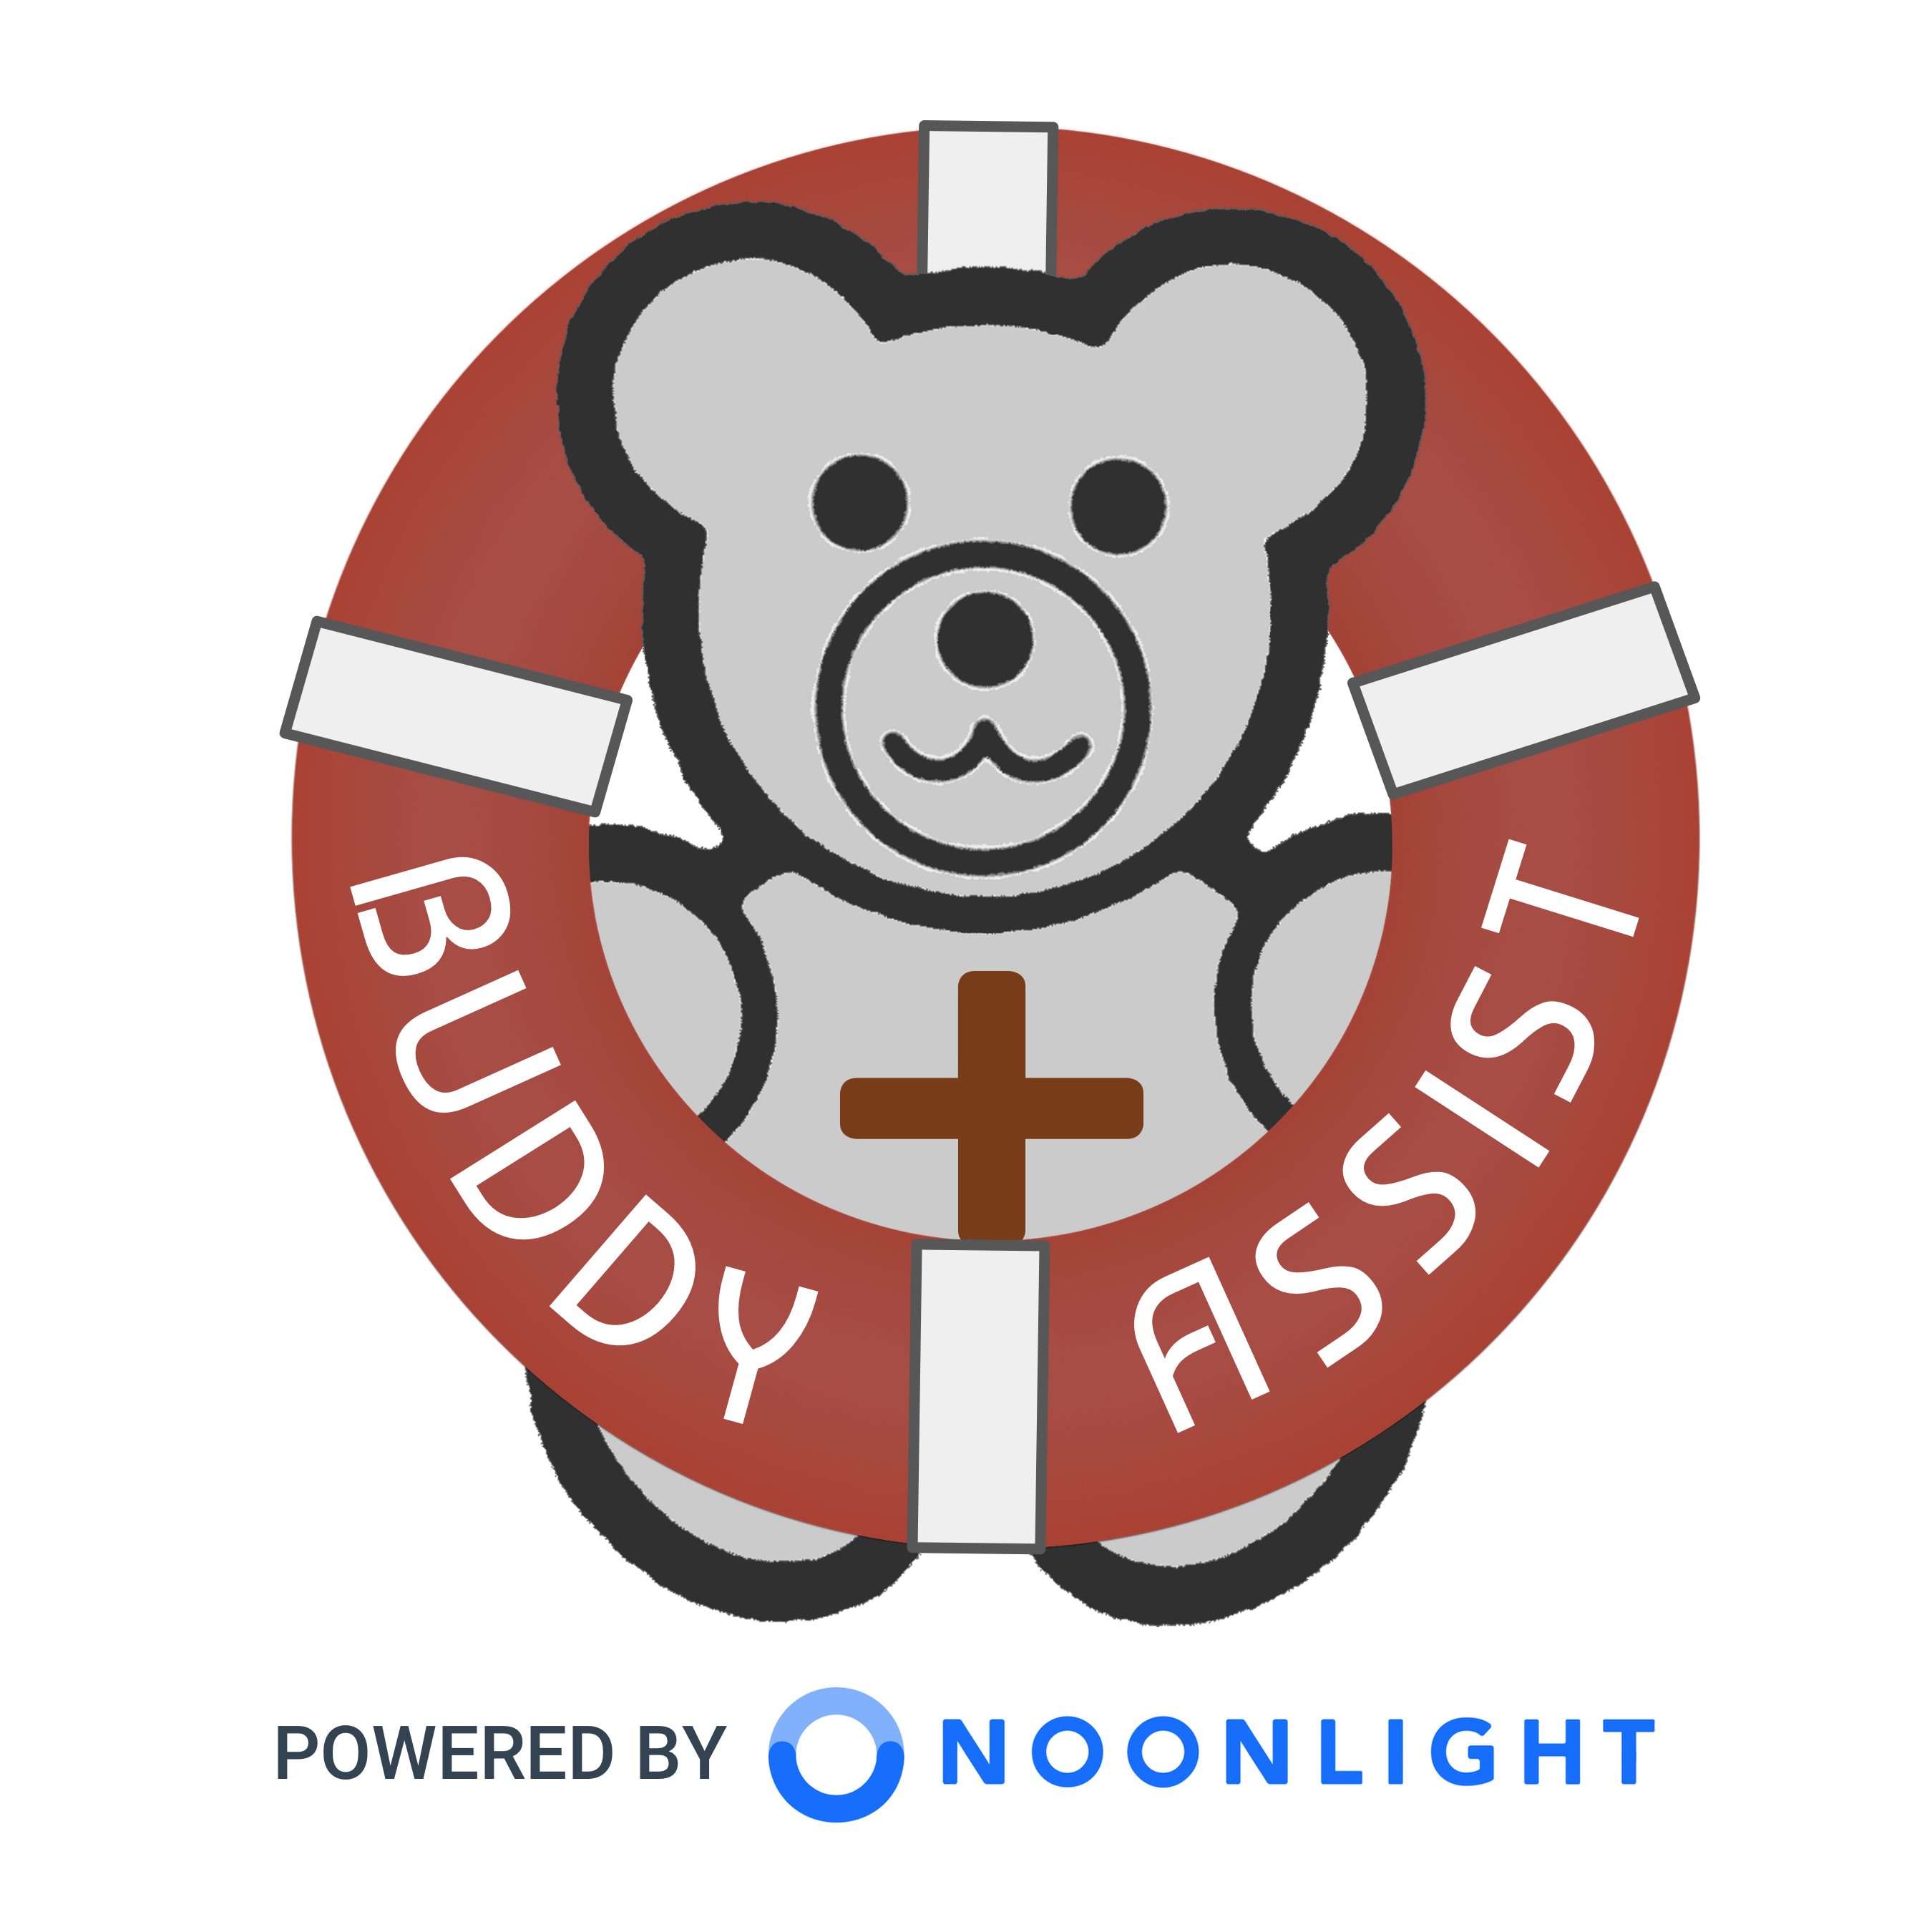 Ask My Buddy, Personal Alert Network and Noonlight Team to Offer Amazon Alexa Users Access to First Responders